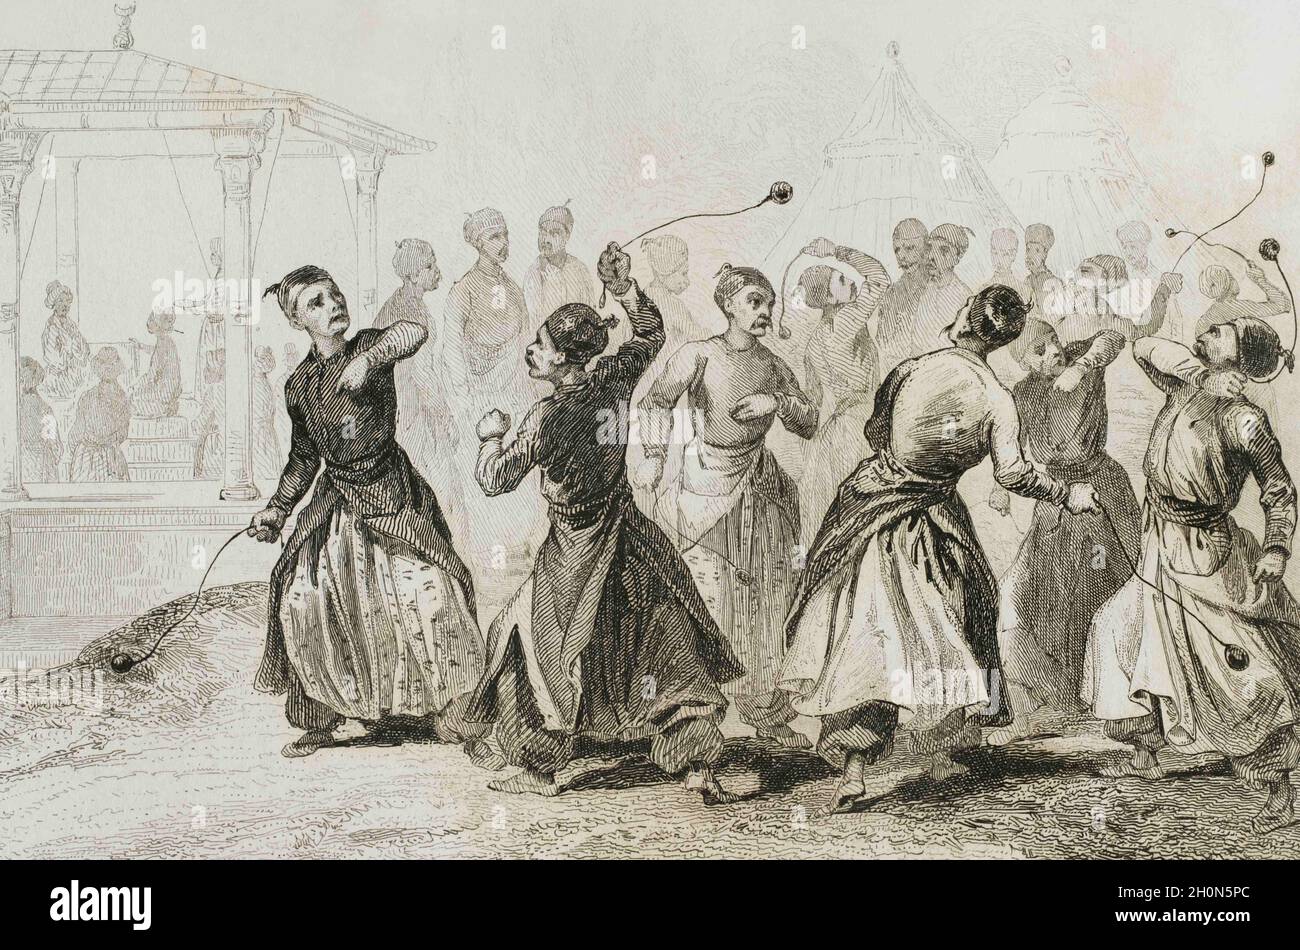 Ottoman Empire. Turkey. Men exercising in Tomak game. Martial art. Traditional game in which woll balls are used on leather straps. Engraving by Lemai Stock Photo